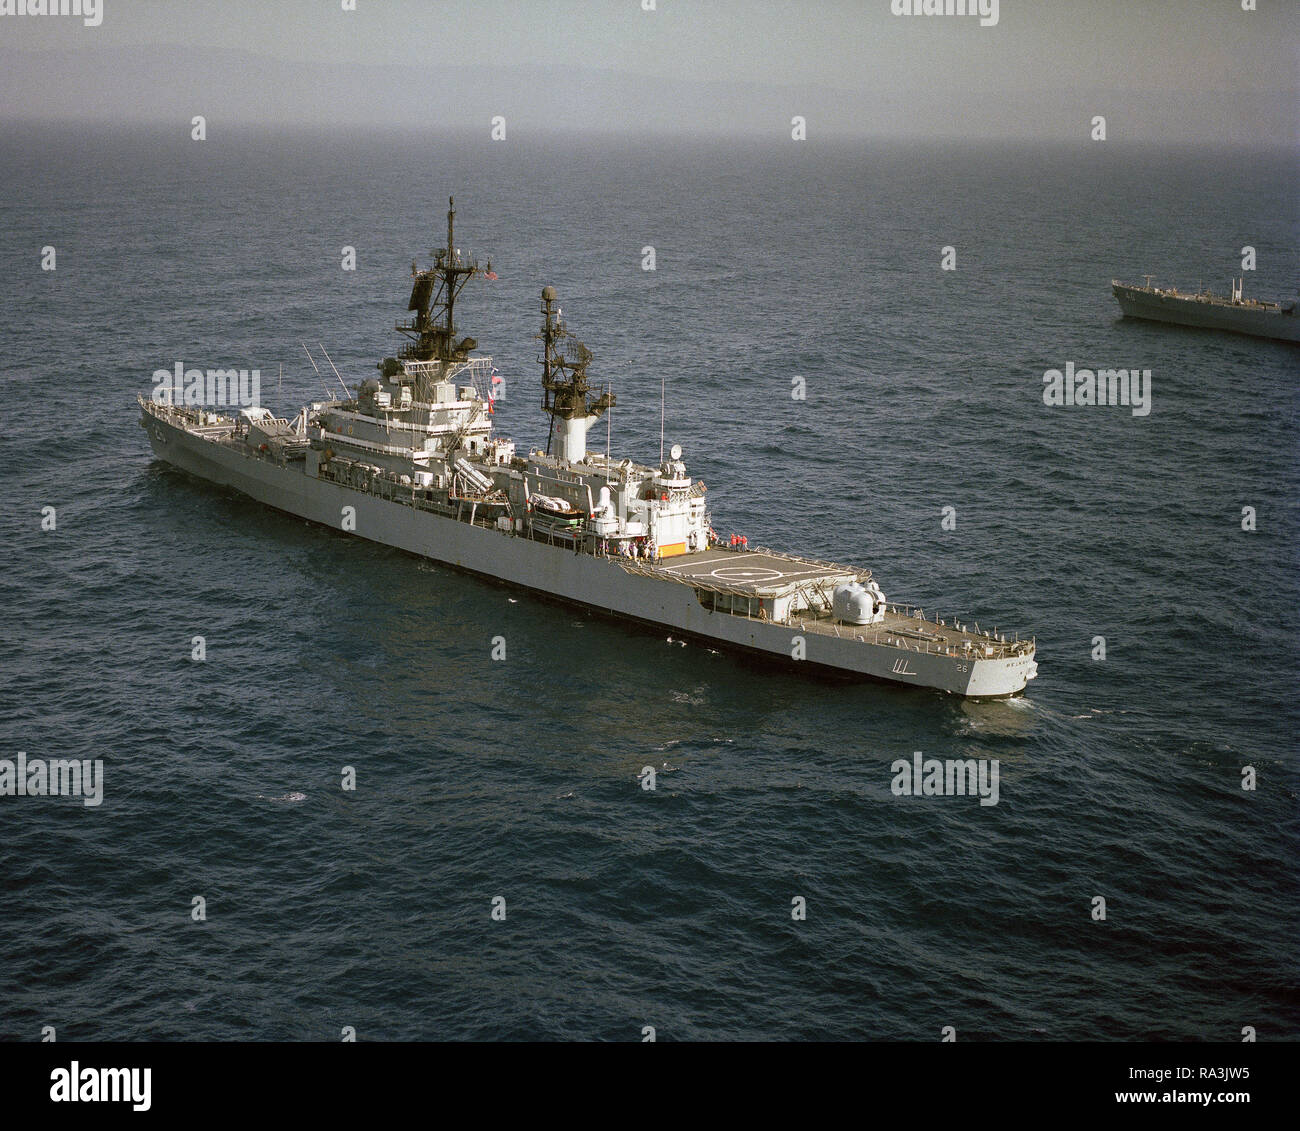 1978 - An aerial port quarter view of the guided missile cruiser USS BELKNAP (CG 26). Stock Photo